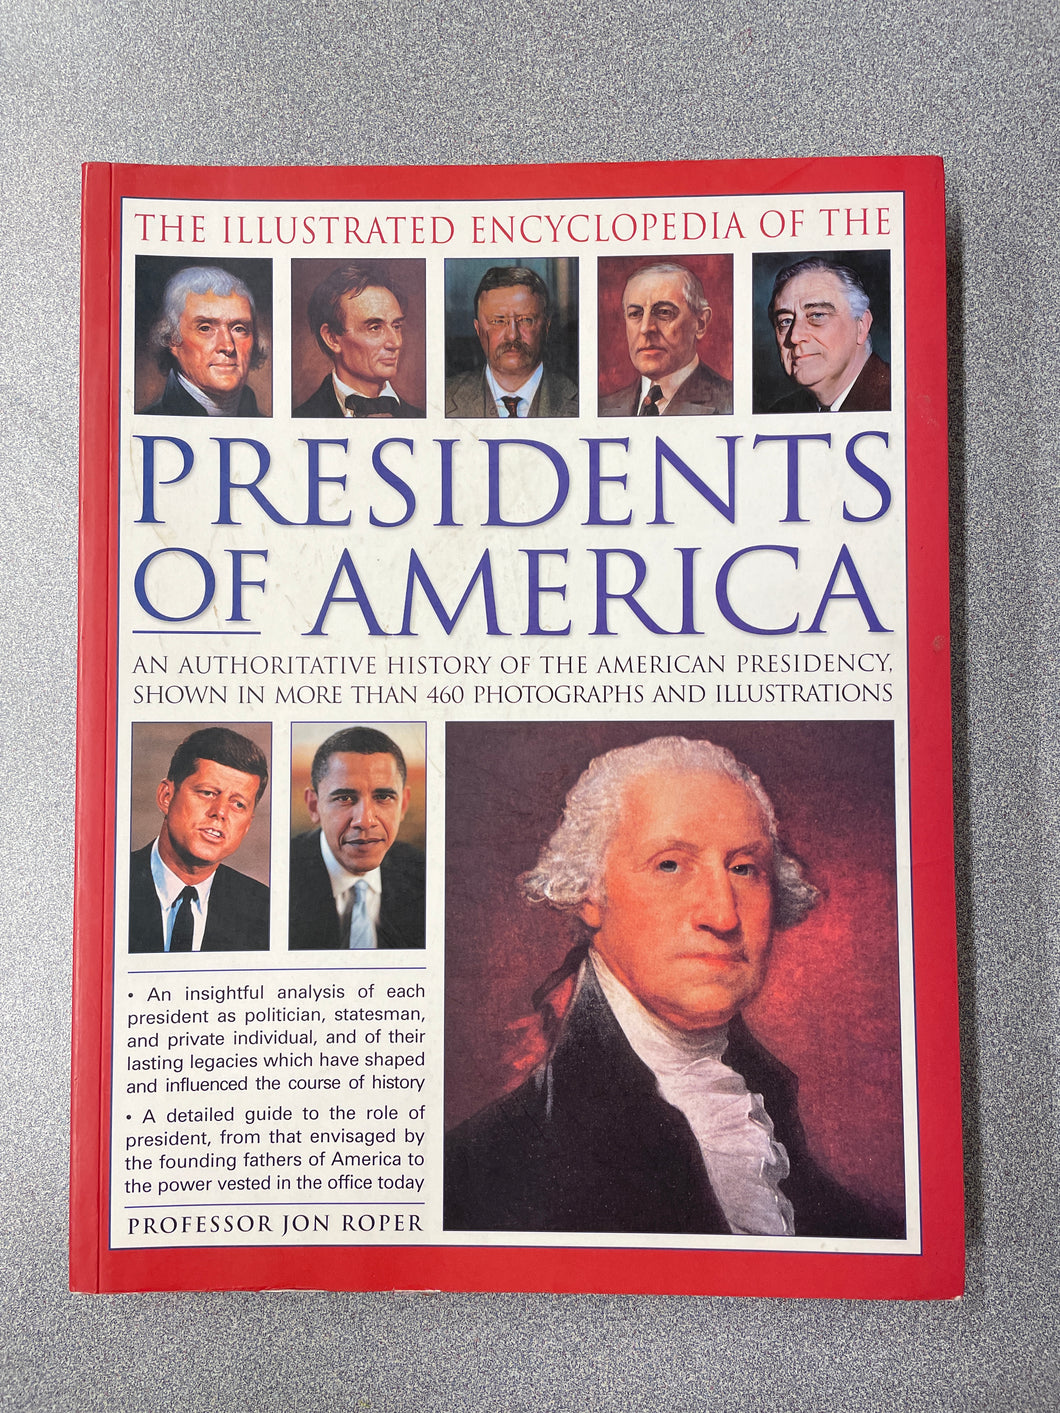 H  The Illustrated Encyclopedia of the Presidents of America: An Authoritative History of the American Presidency, Shown in More Than 460 Photographs and Illustrations, Roper, Jon [2016] N 1/24